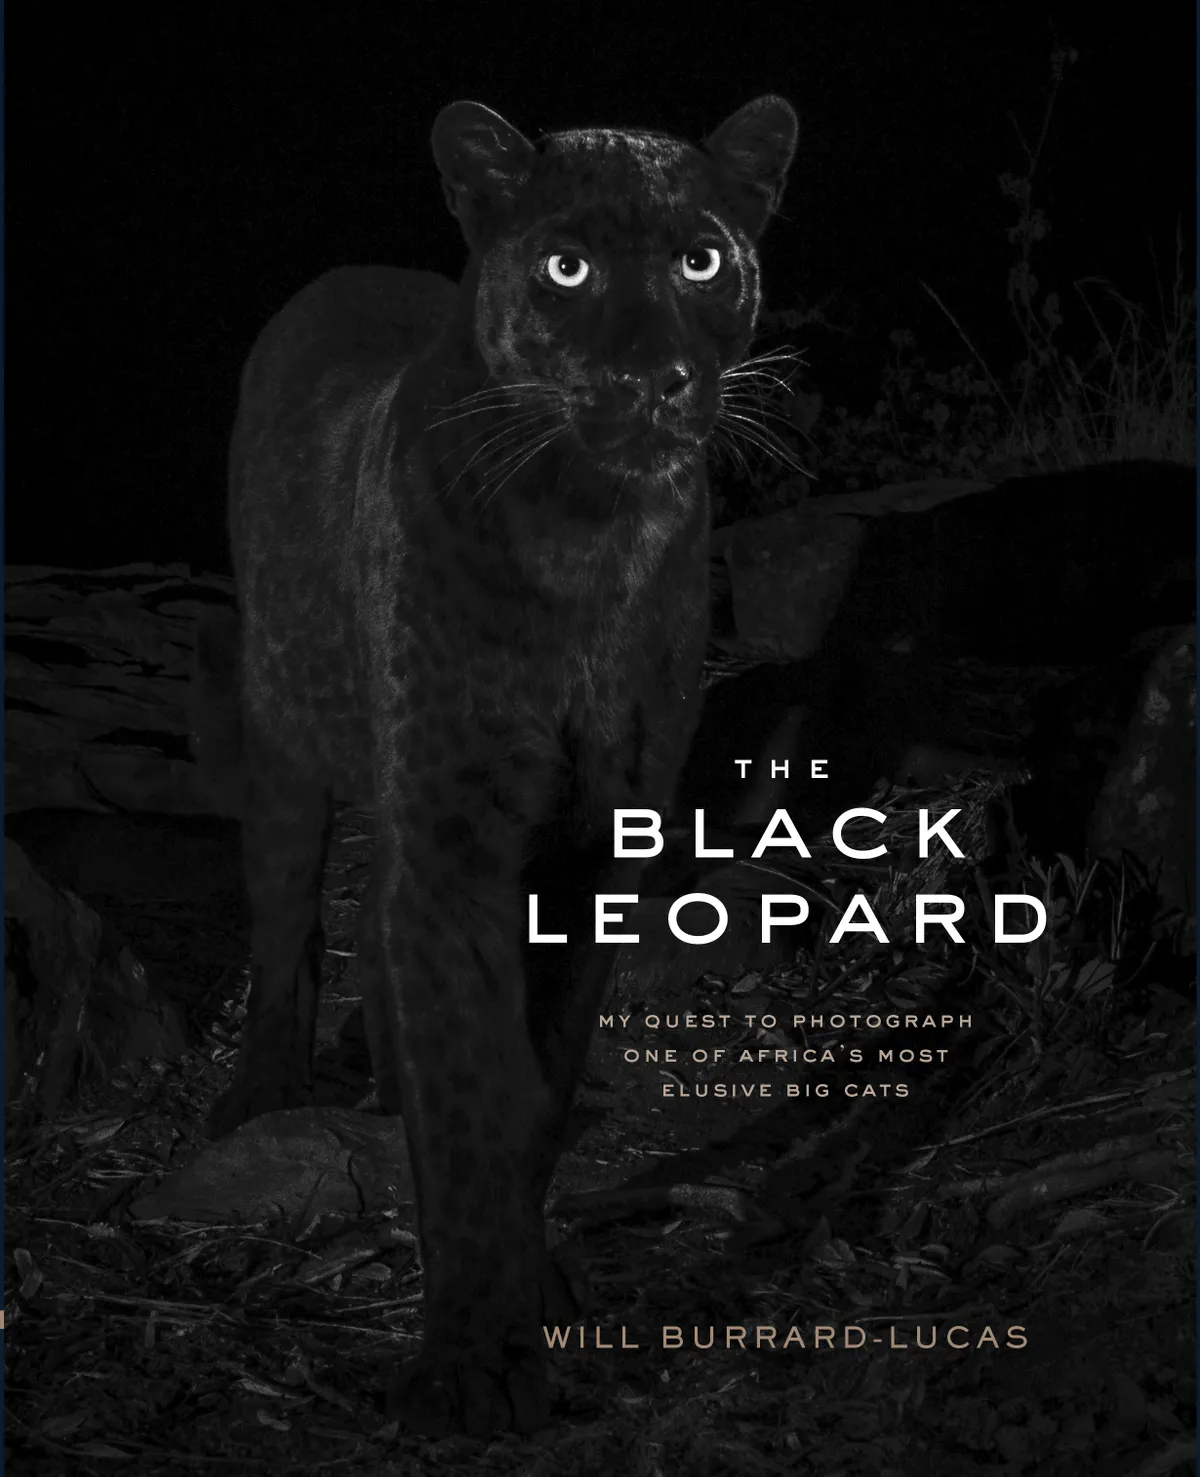 The Black Leopard: My Quest to Photograph One of Africa’s Most Elusive Big Cats by Will Burrard-Lucas. Published by Chronicle Books, £26.